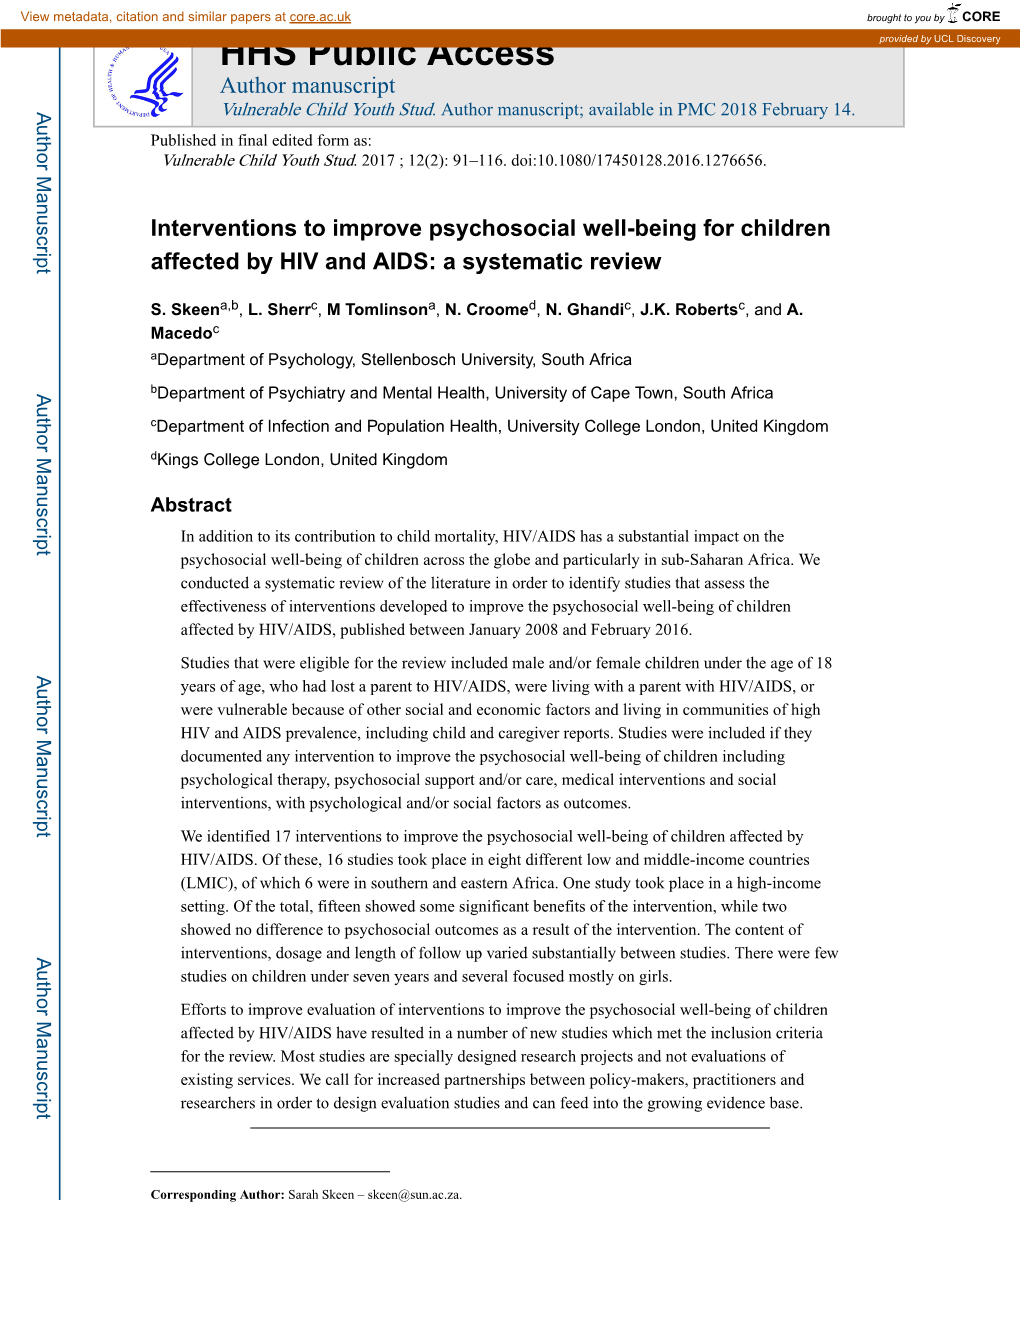 Interventions to Improve Psychosocial Well-Being for Children Affected by HIV and AIDS: a Systematic Review